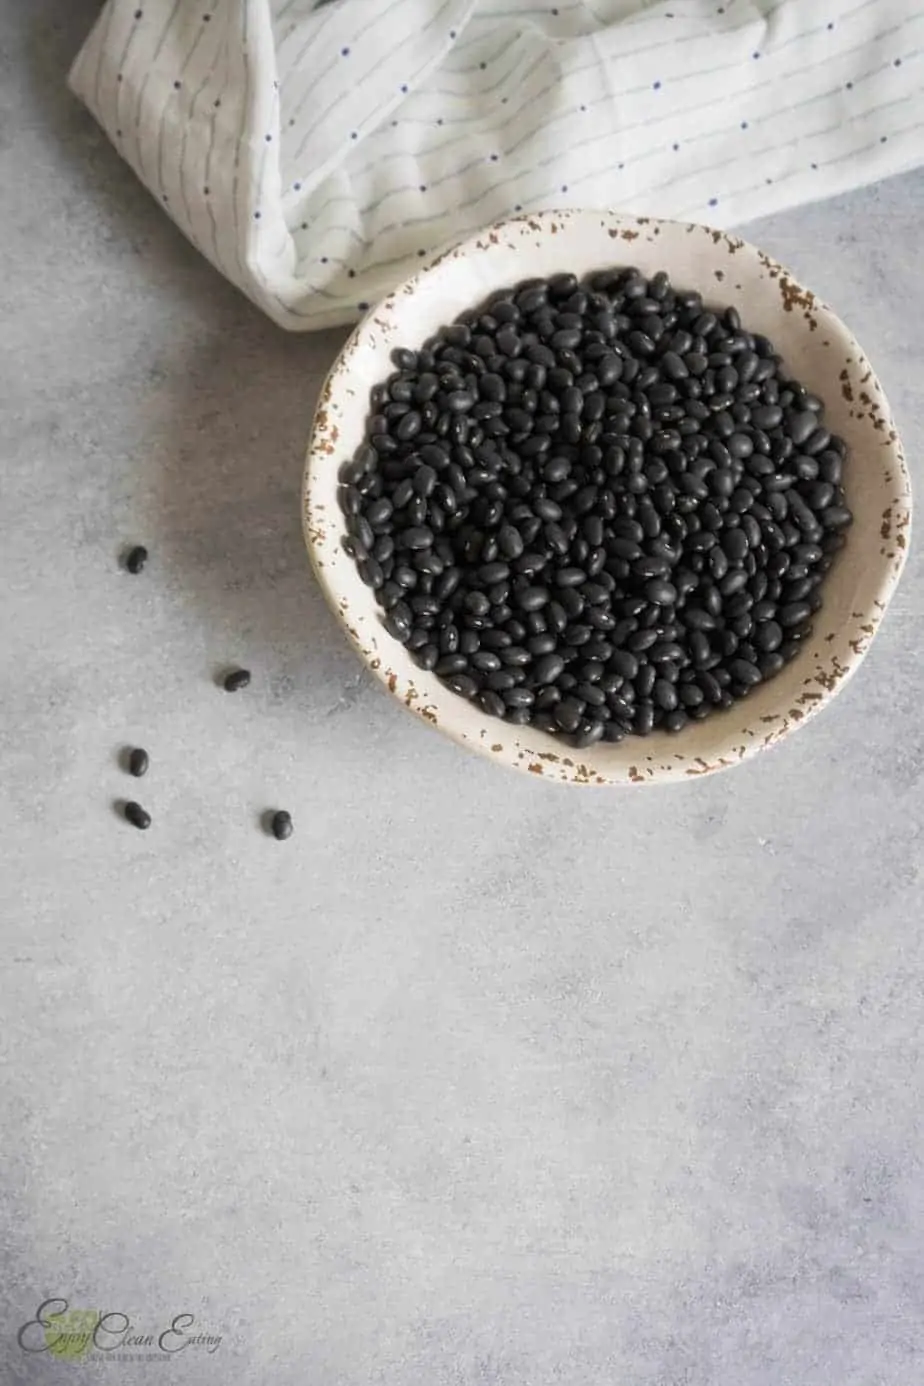 The main ingredient for this recipe dry black beans in a bowl.